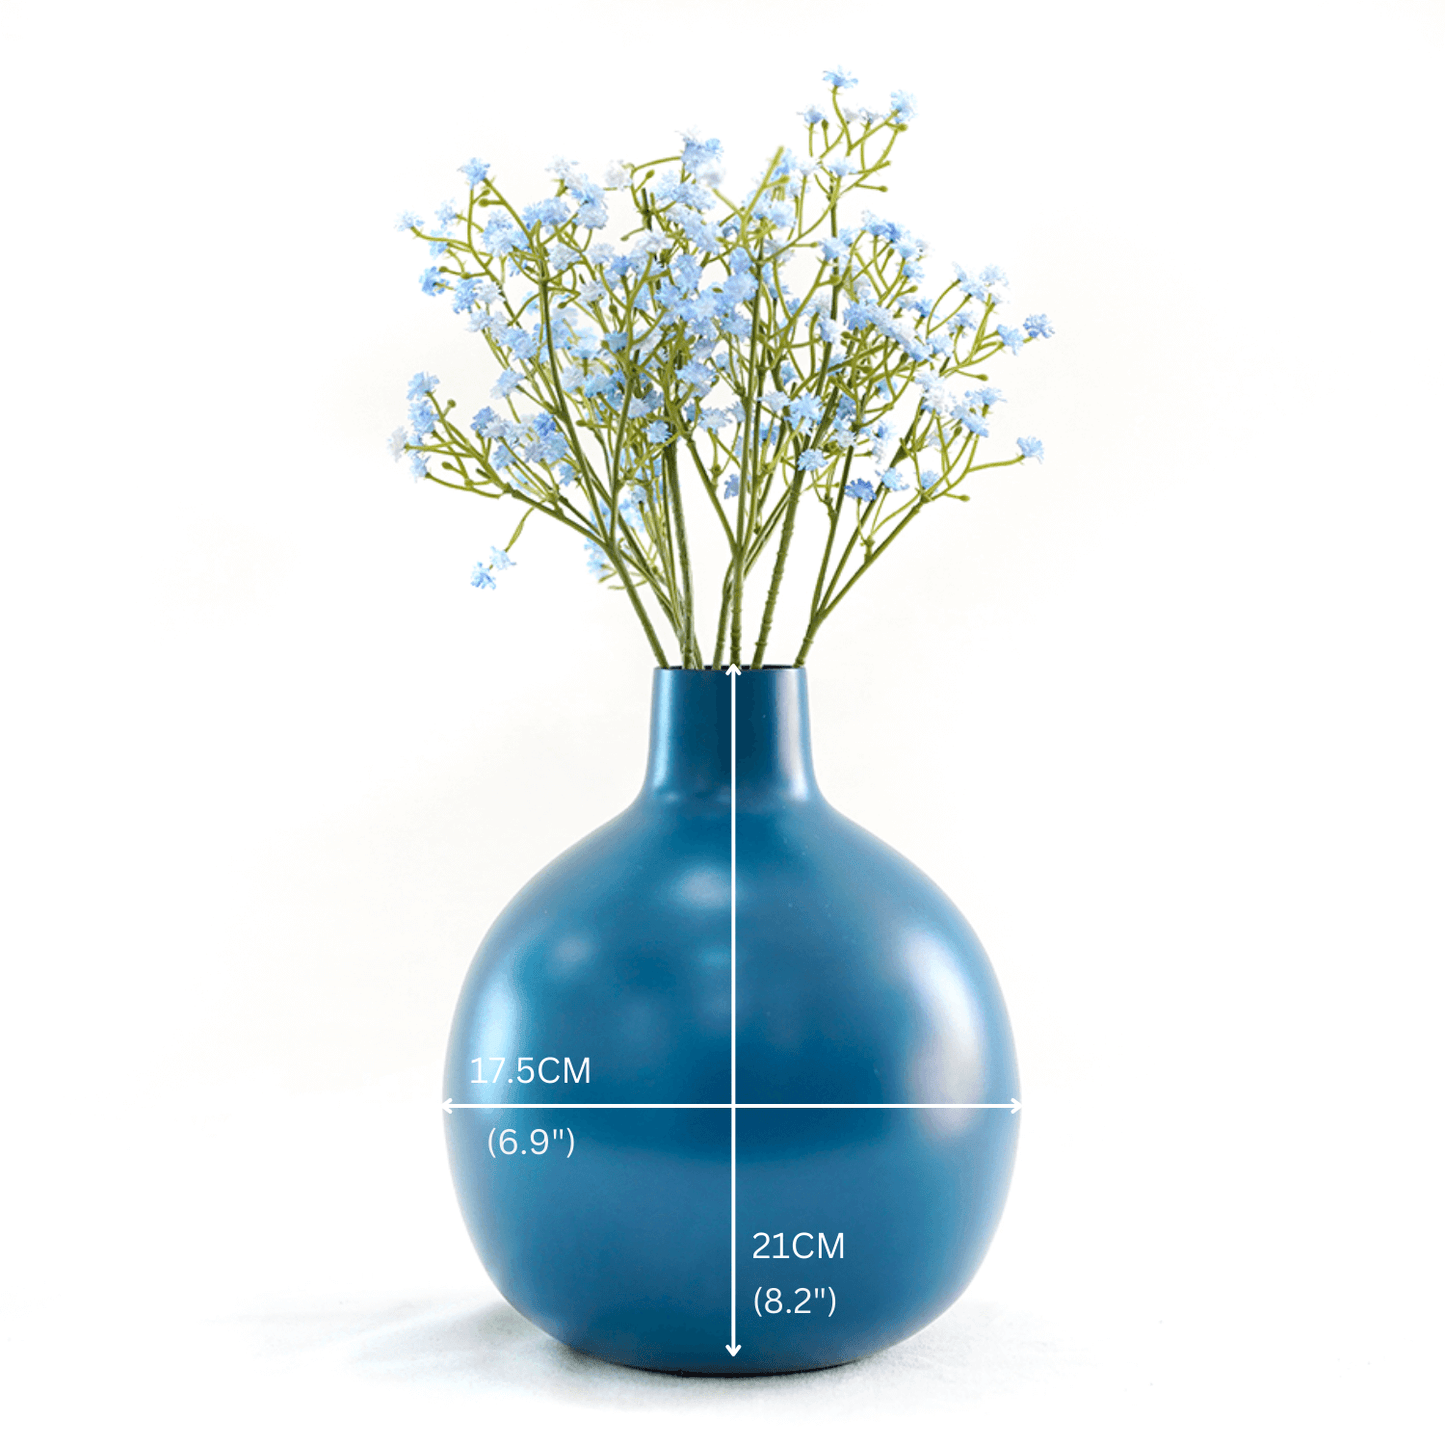 Flower vase with flowers - large 